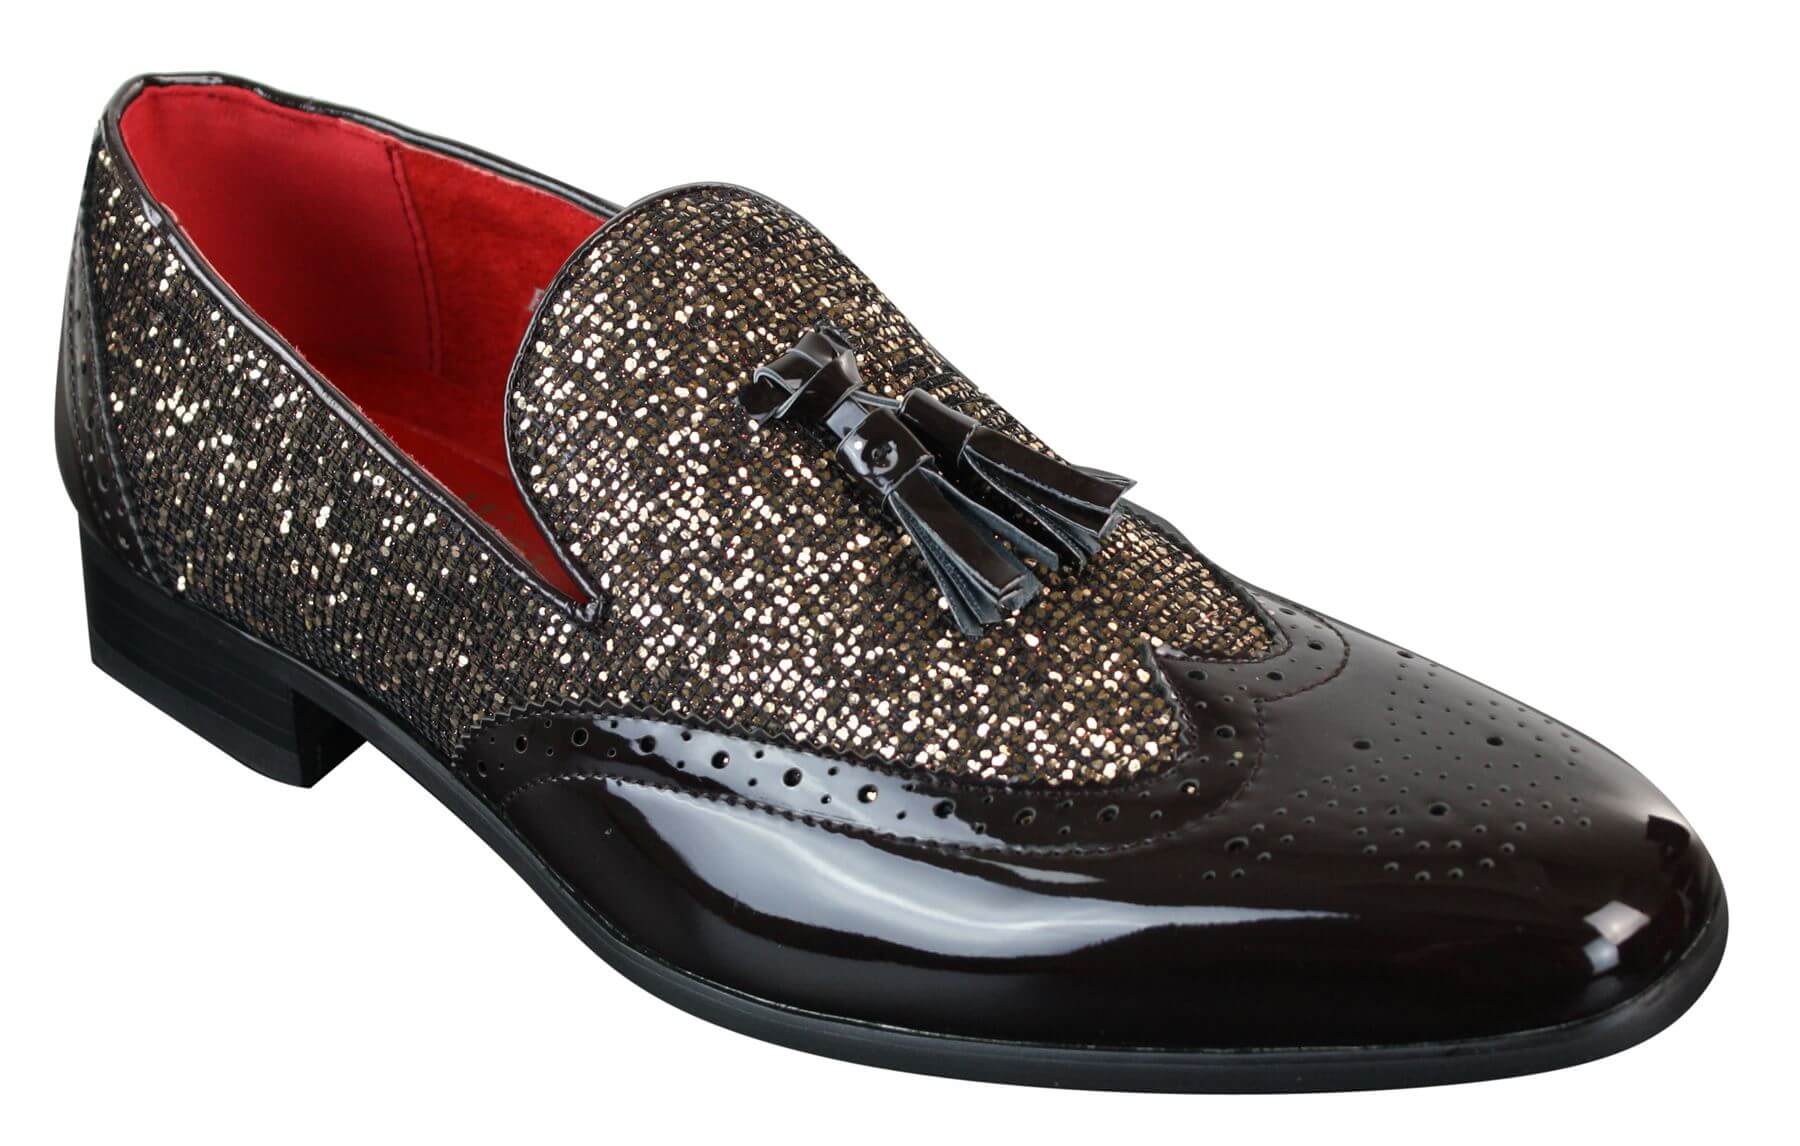 Mens Smart Party Shiny Tassle Shoes Red Silver Black Slip On Patent ...